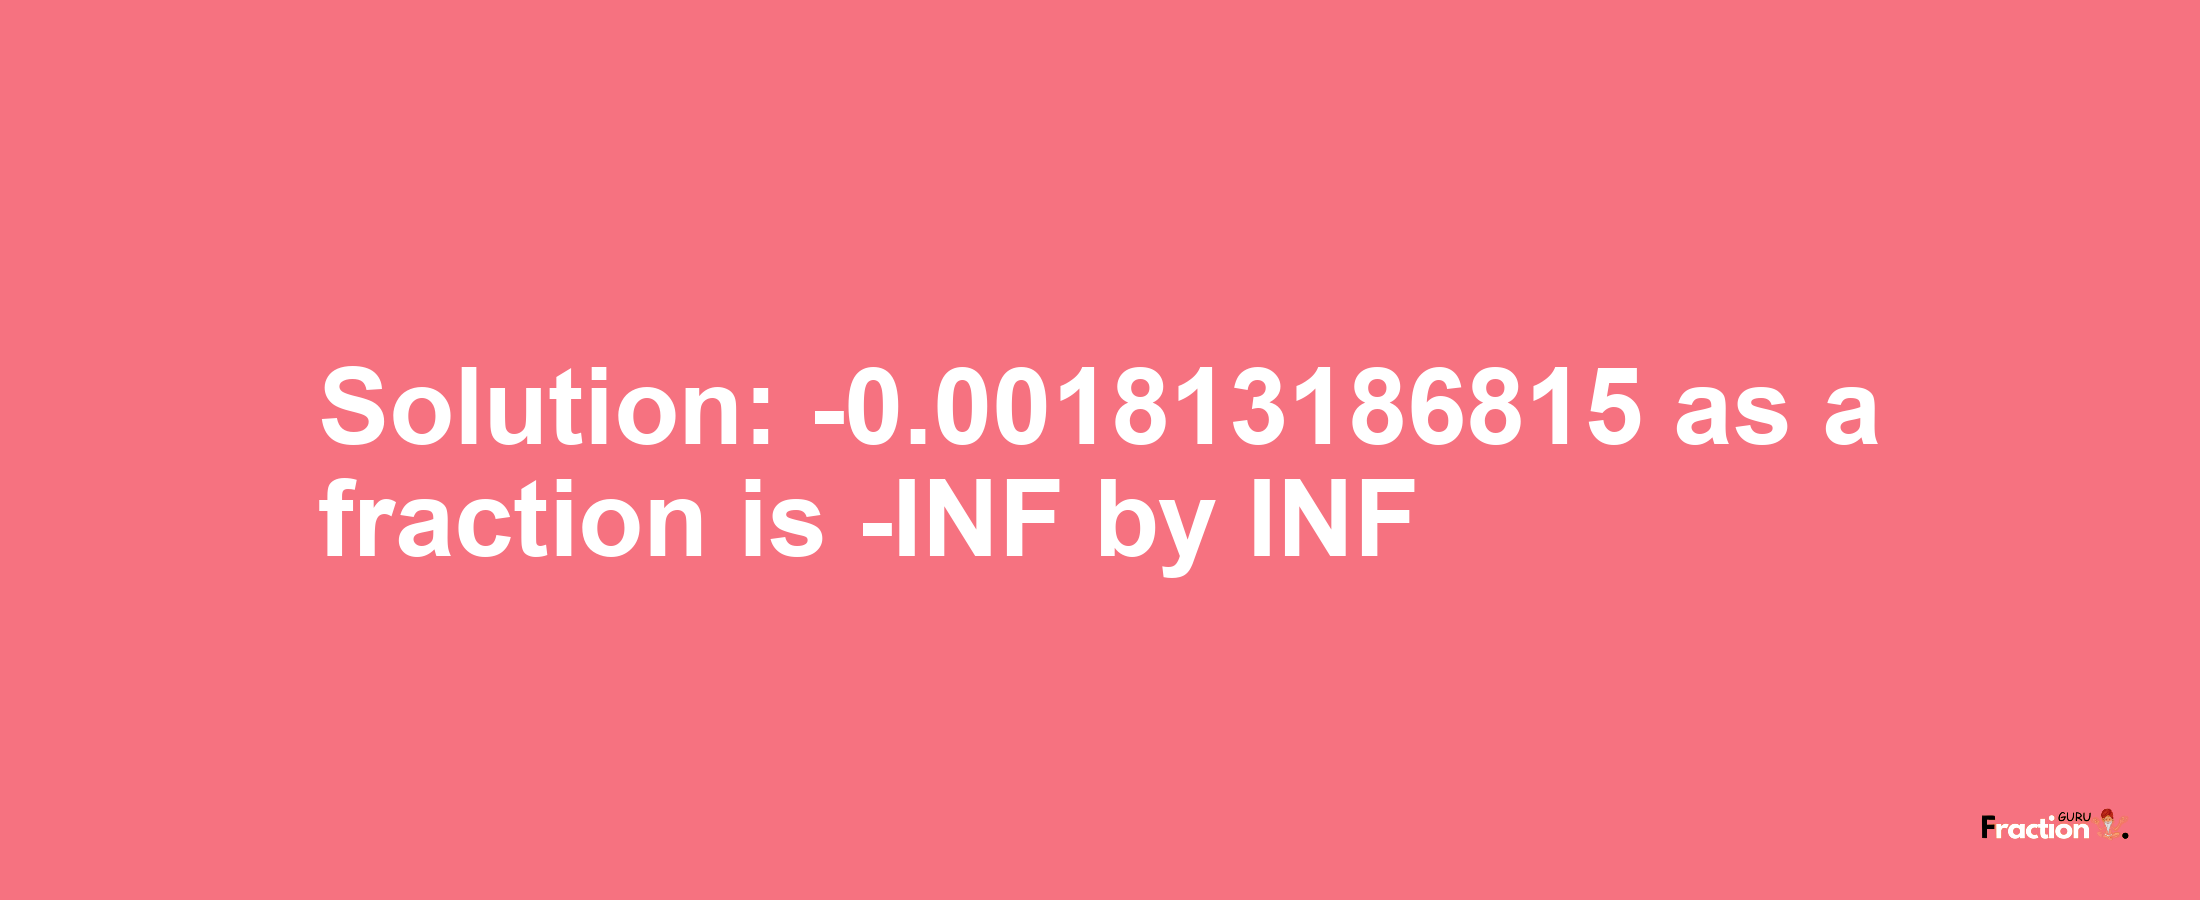 Solution:-0.001813186815 as a fraction is -INF/INF